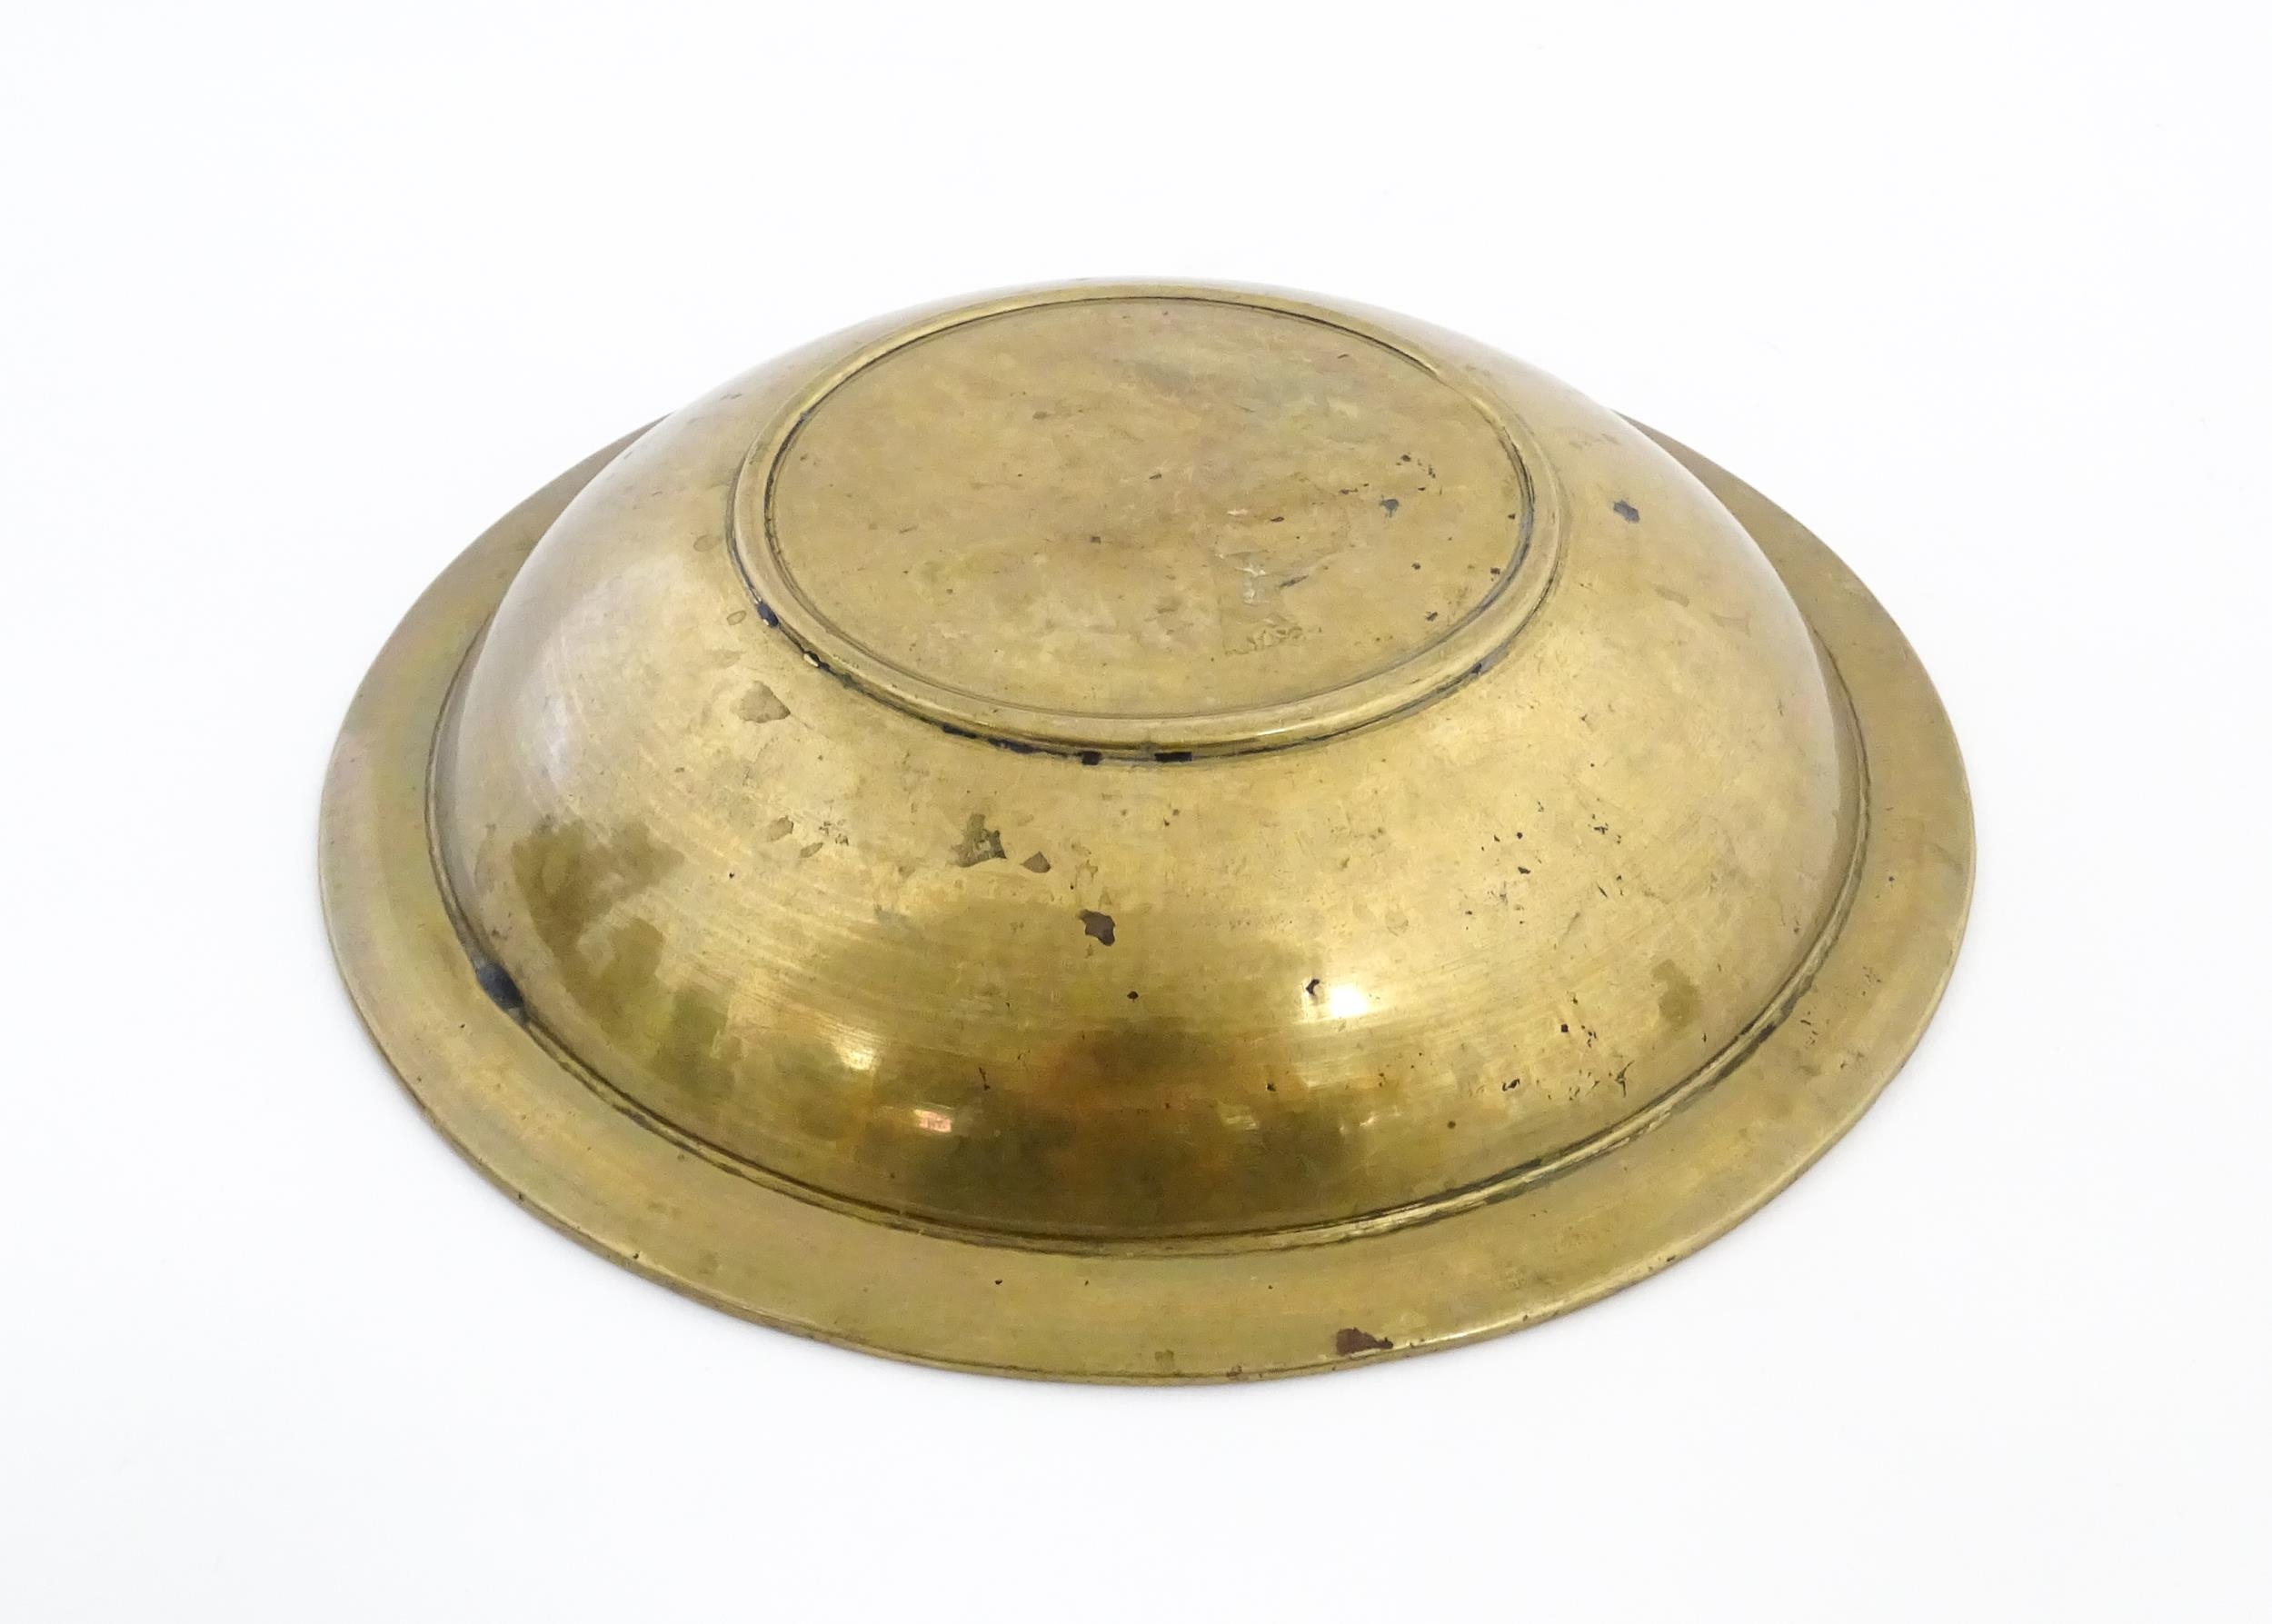 A Middle Eastern brass dish / bowl with incised detail and inlaid white metal and copper - Image 8 of 8